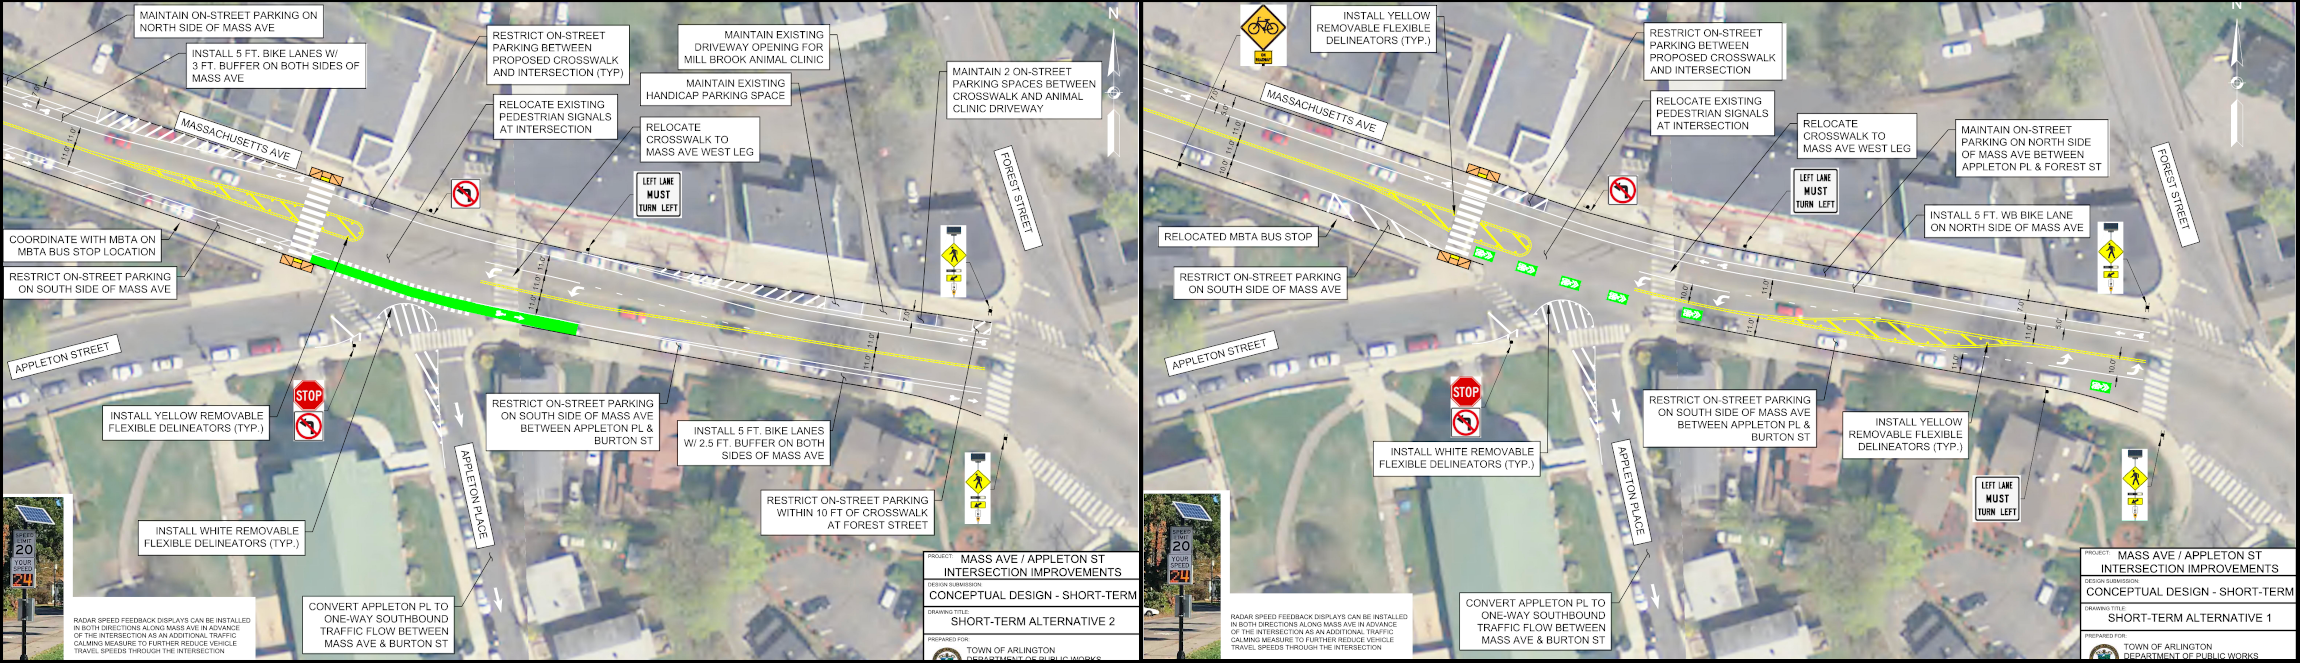 Short-term improvement proposals for Massachusetts Ave. near Appleton St. in Arlington, as of May 2021.